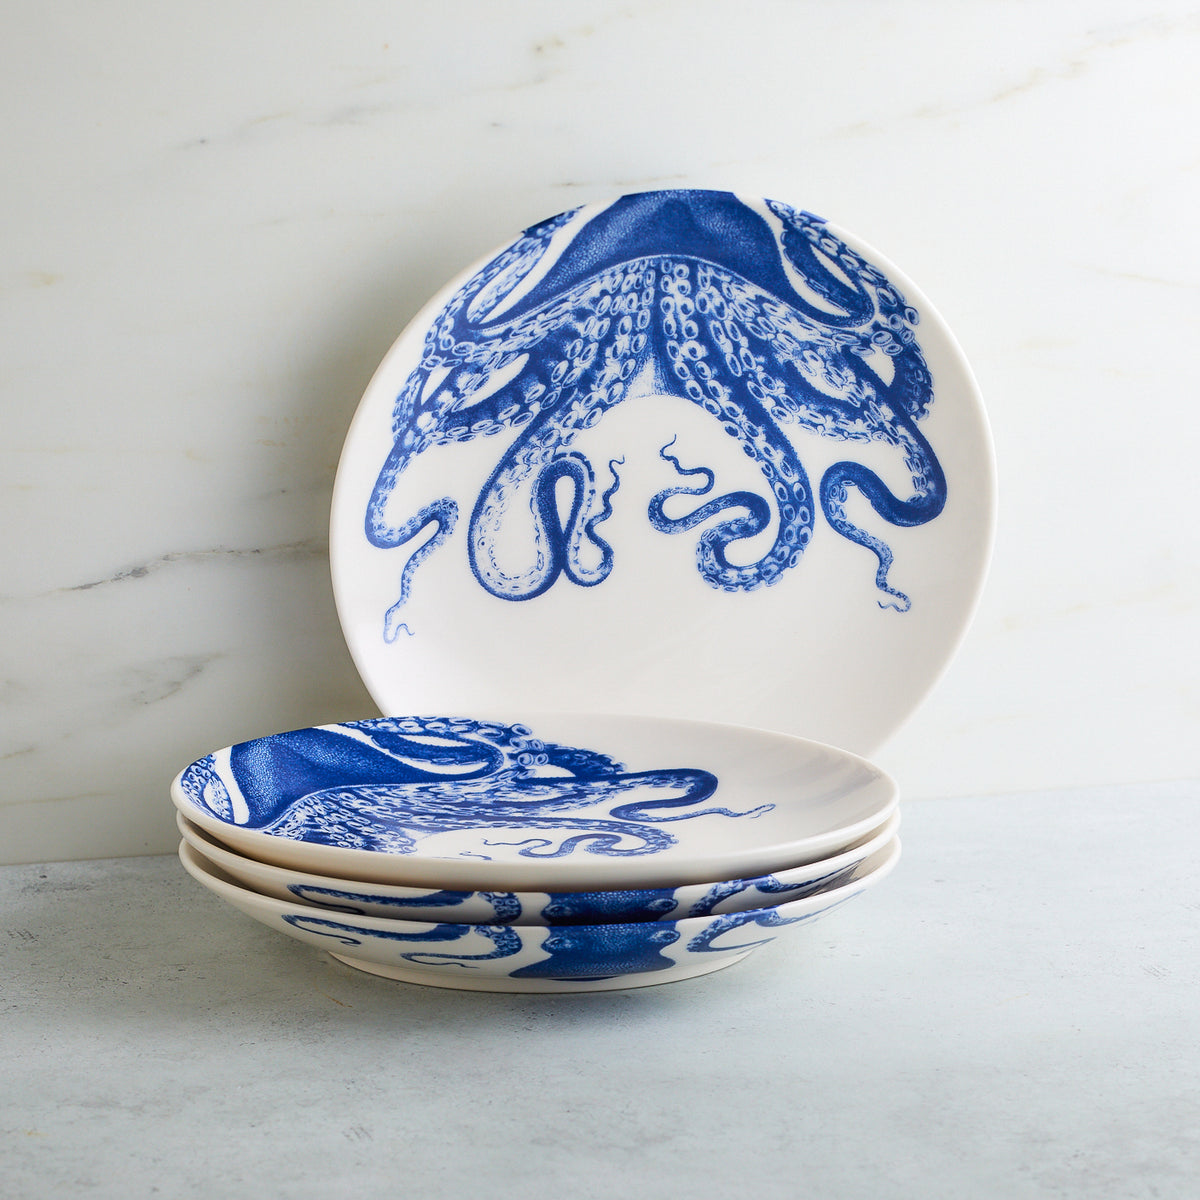 Four creamy white Lucy Coupe Salad Plates by Caskata Artisanal Home, featuring blue octopus designs, are stacked on a gray surface in front of a light-colored backdrop. These contemporary-shaped dishes offer both dishwasher and microwave safe convenience.